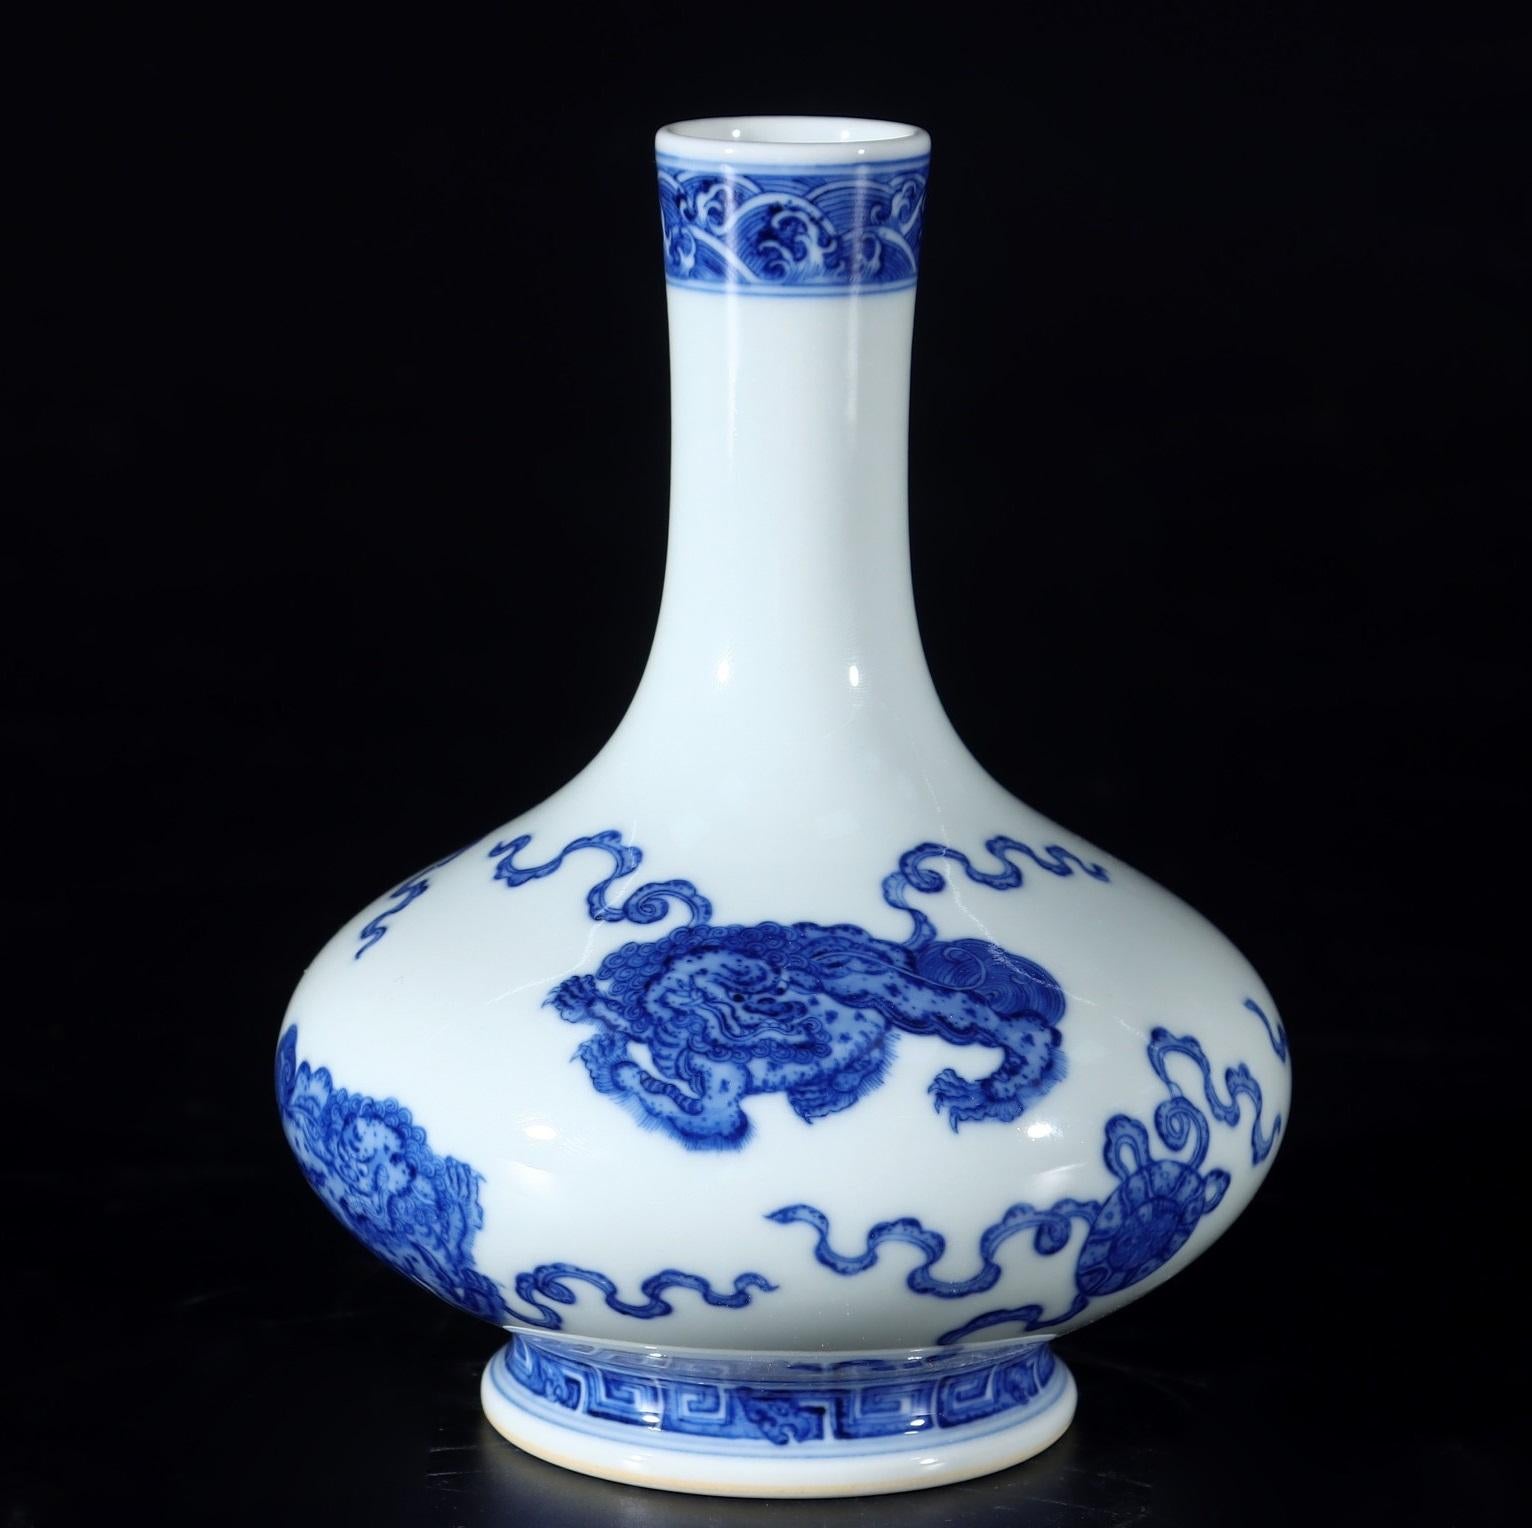 This handmade blue white lions porcelain vase is a truly unique and special collectible piece made in China. 

In Chinese culture, lions symbolize power, protection, and auspiciousness. They are often depicted in pairs as guardian figures at the